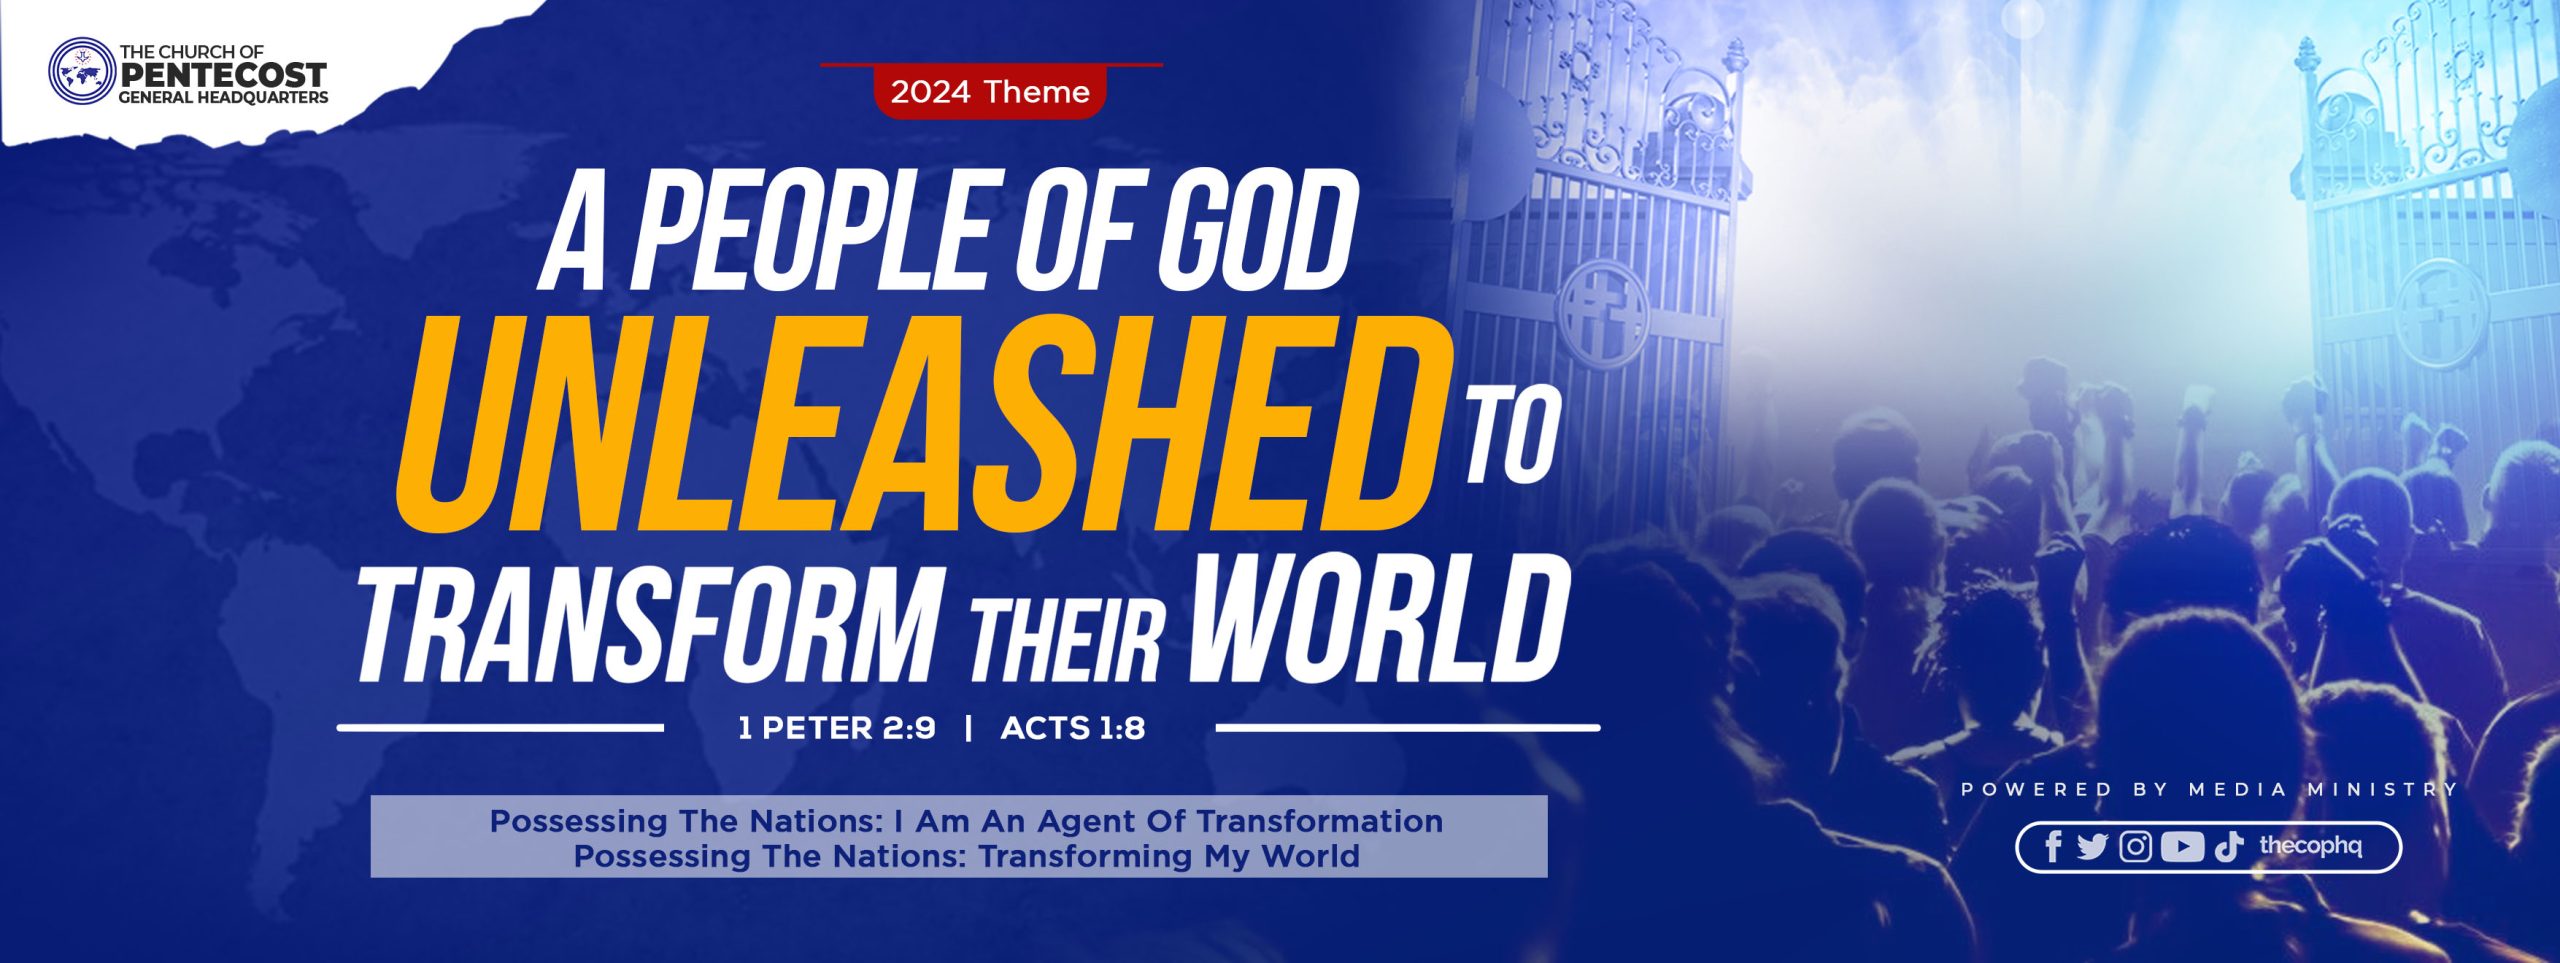 RATIONALE FOR 2024 THEME THE CHURCH OF PENTECOST